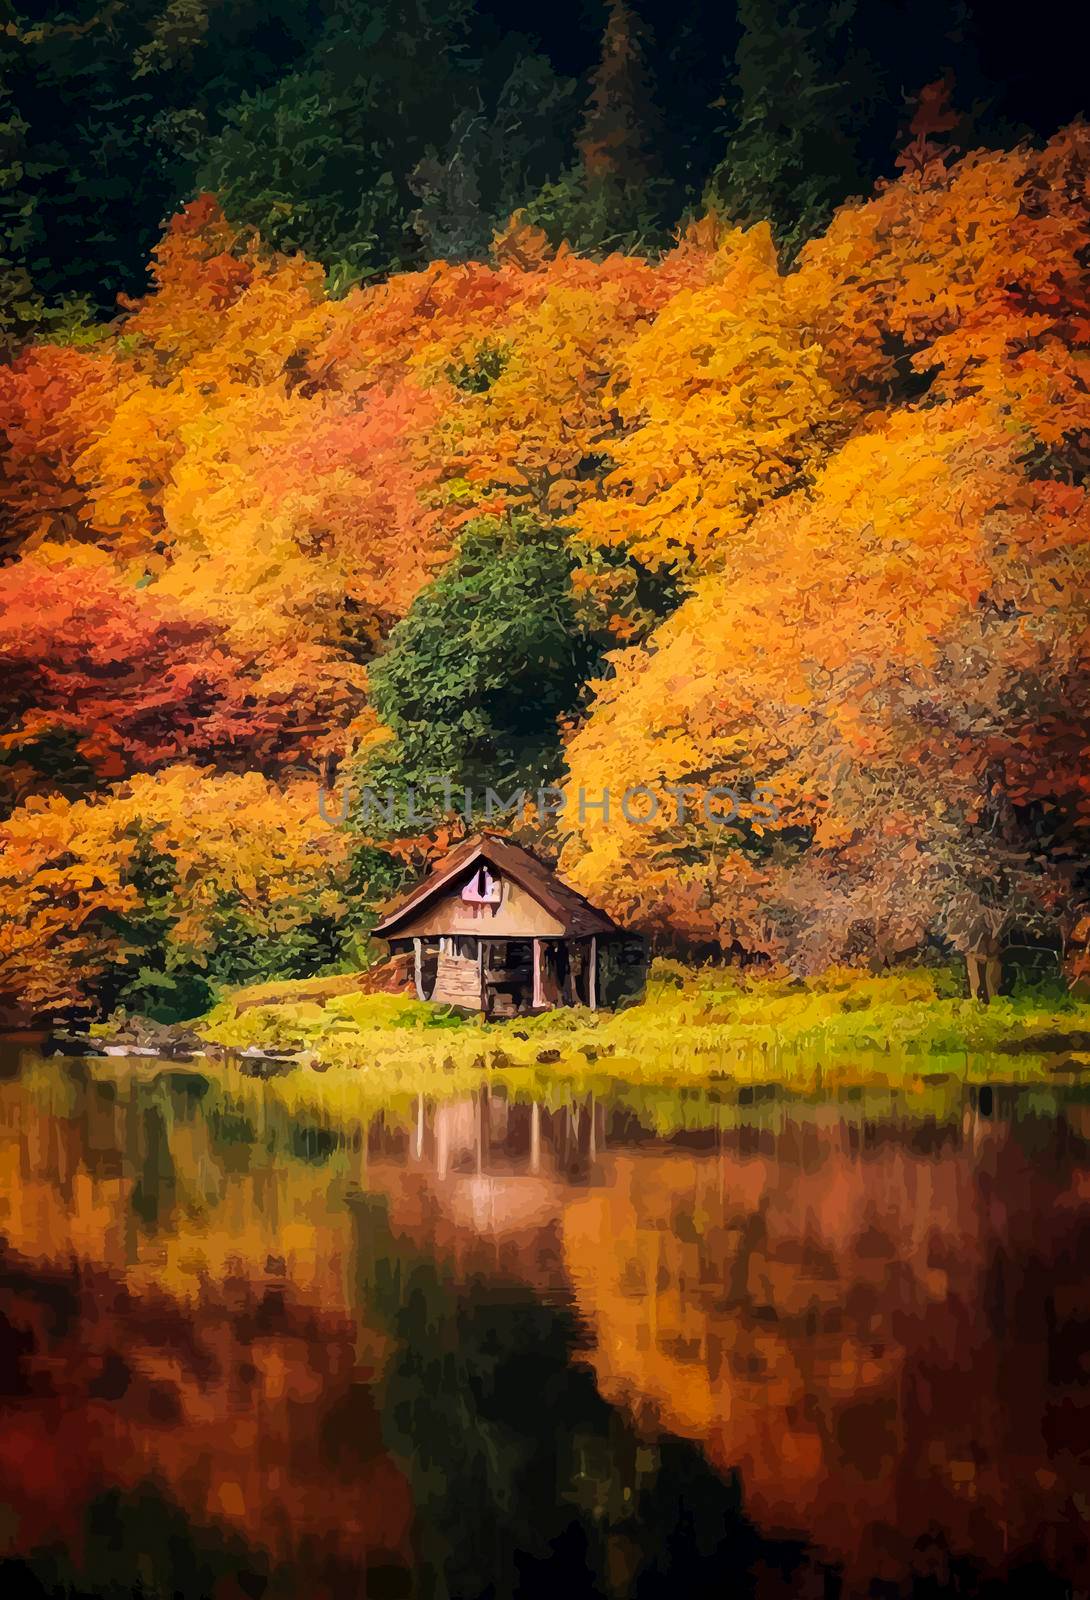 cabin in the woods by the lake, forest in autumn by JpRamos